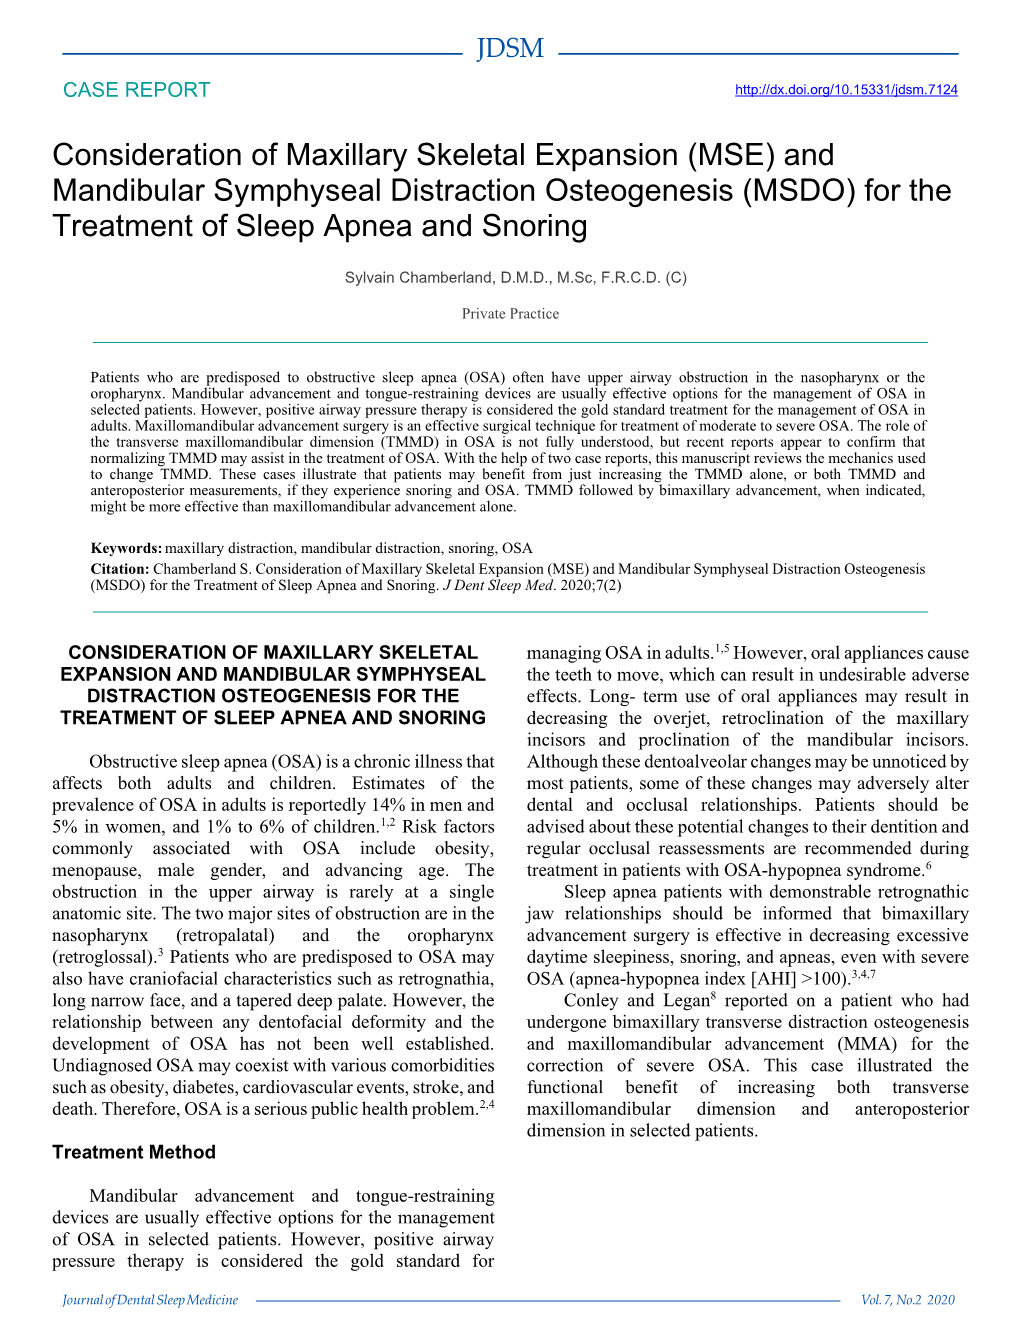 (MSE) and Mandibular Symphyseal Distraction Osteogenesis (MSDO) for the Treatment of Sleep Apnea and Snoring